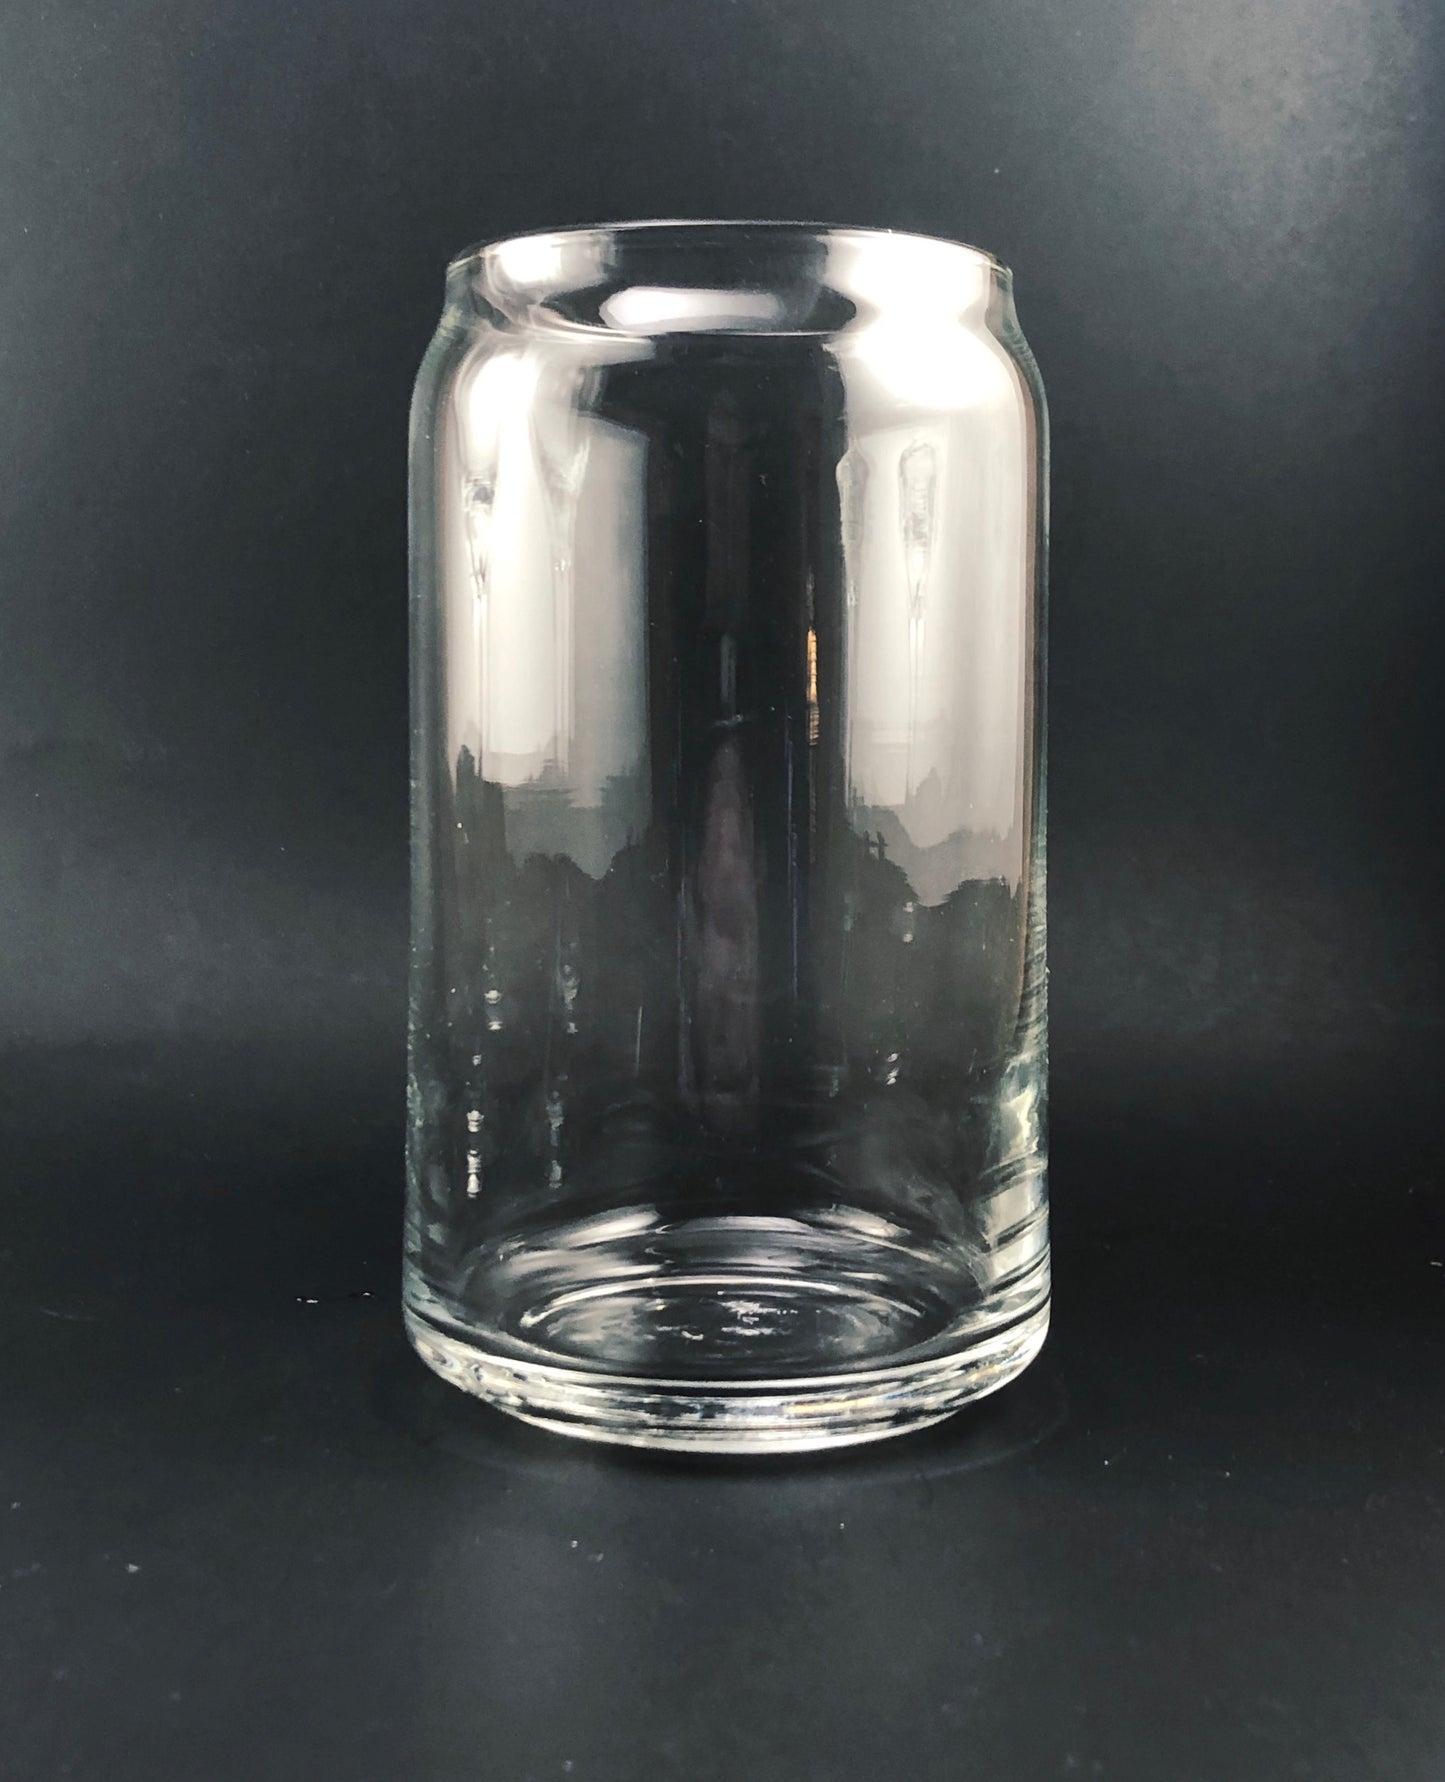 Marblehead, Ohio Stemless Wine, Rocks or Beer Can Glass